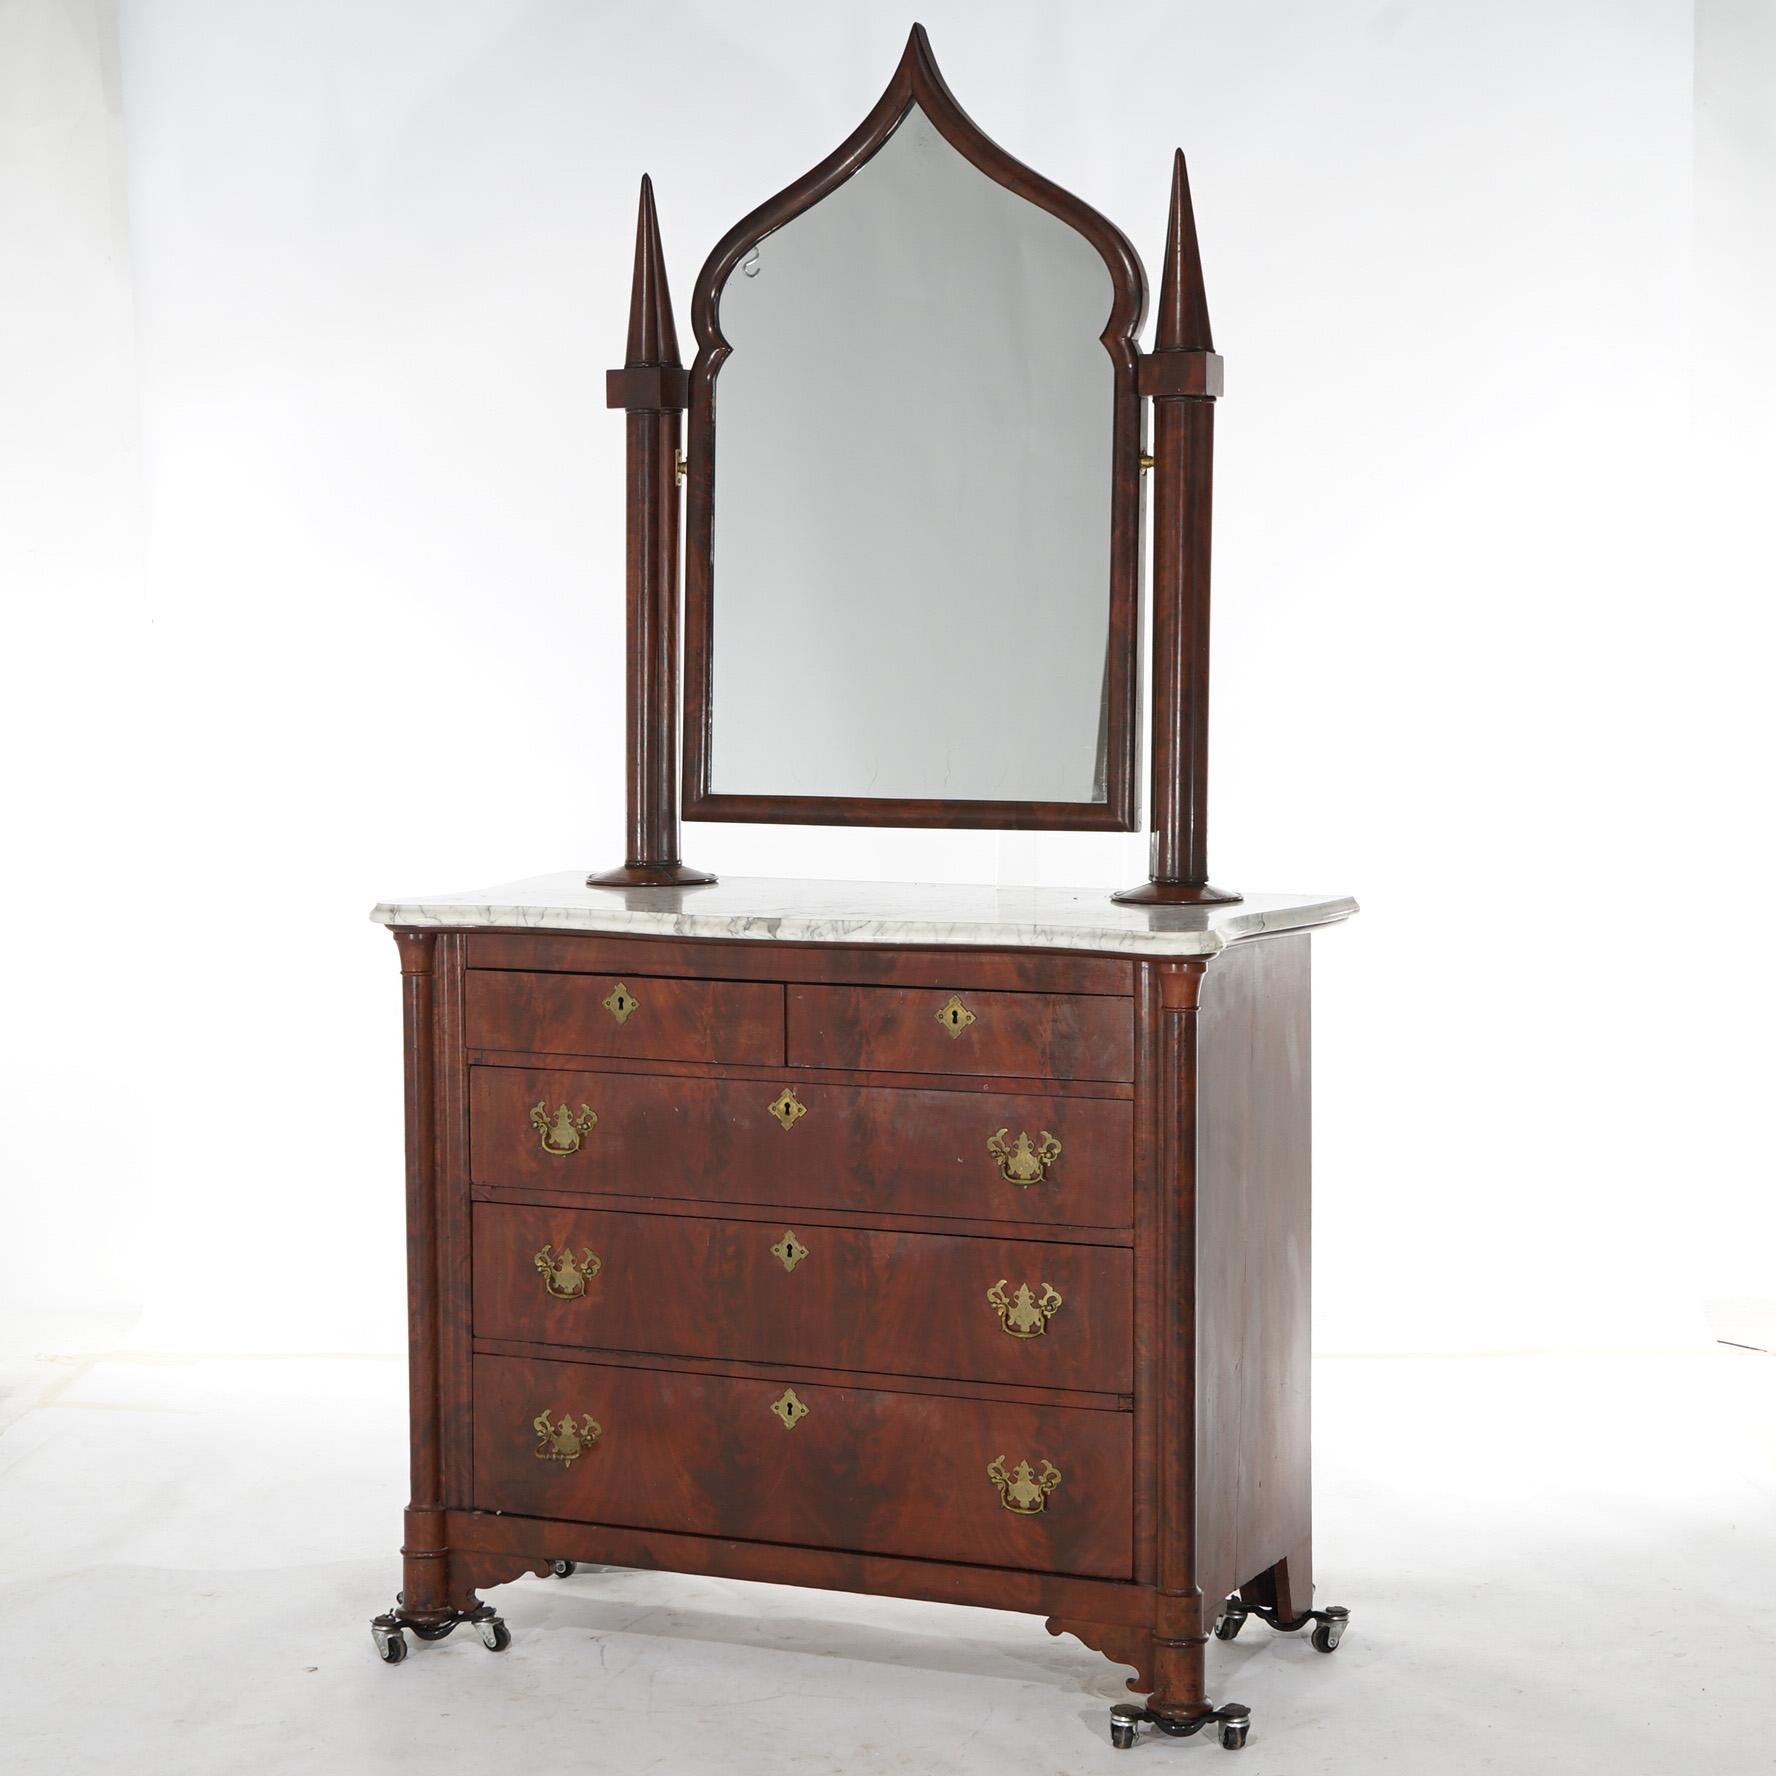 An antique American Empire Gothic Revival chest of drawers offers flame mahogany construction with cathedral arch form mirror with flanking spire supports over shaped marble top over serpentine chest having two smaller upper and three lower long